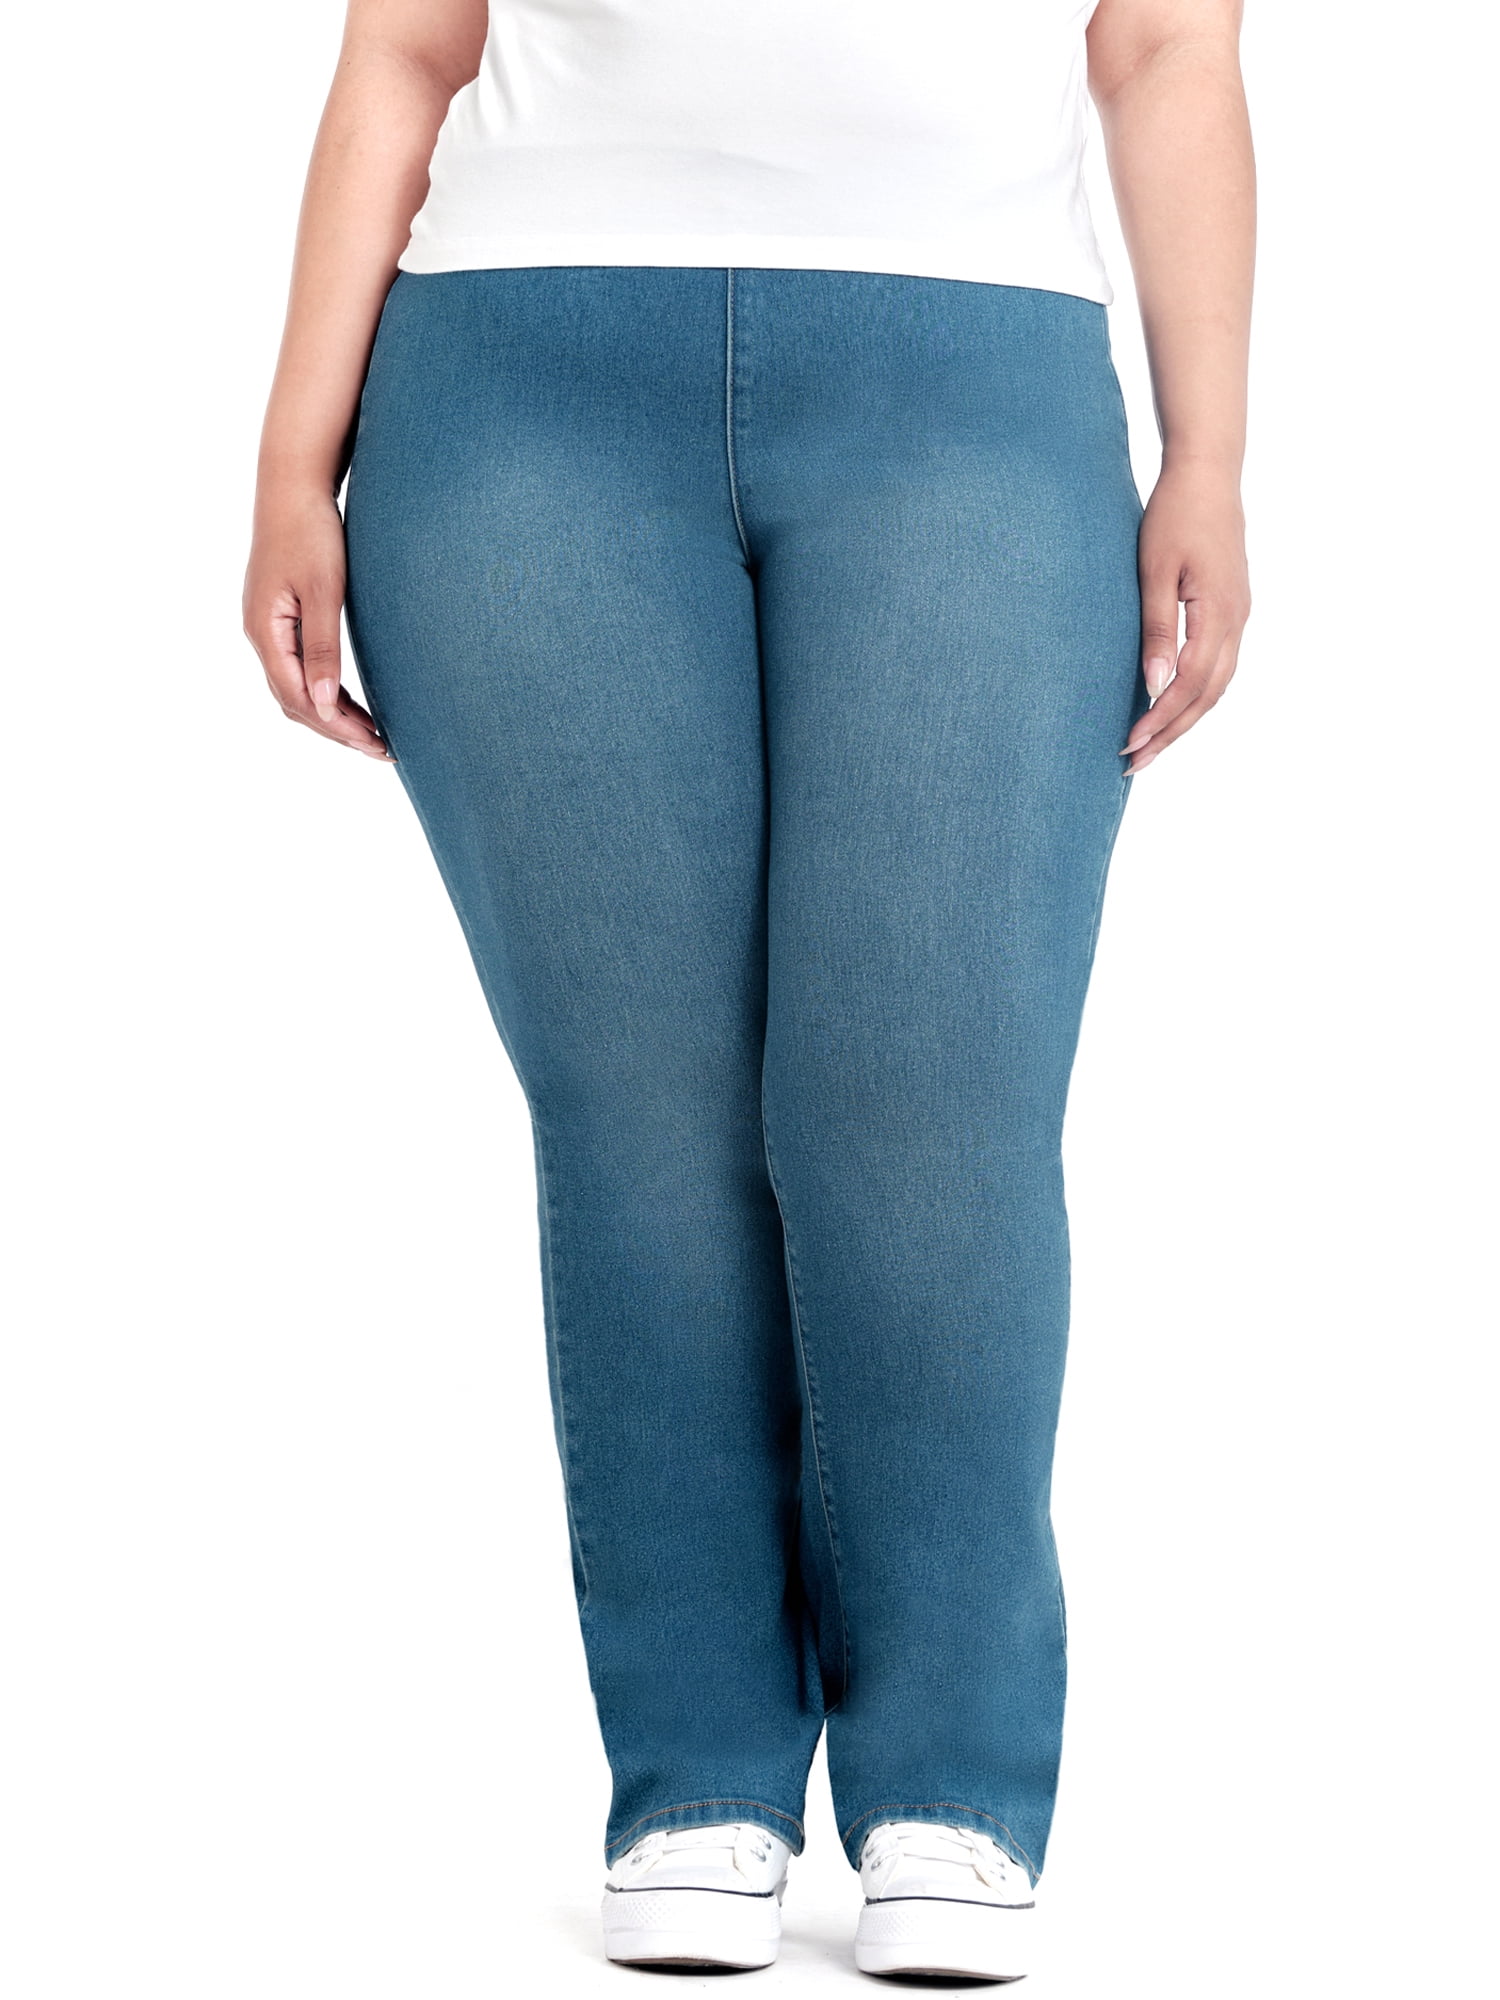 A3 Denim Women's Plus Size Bootcut Pull on Jeans